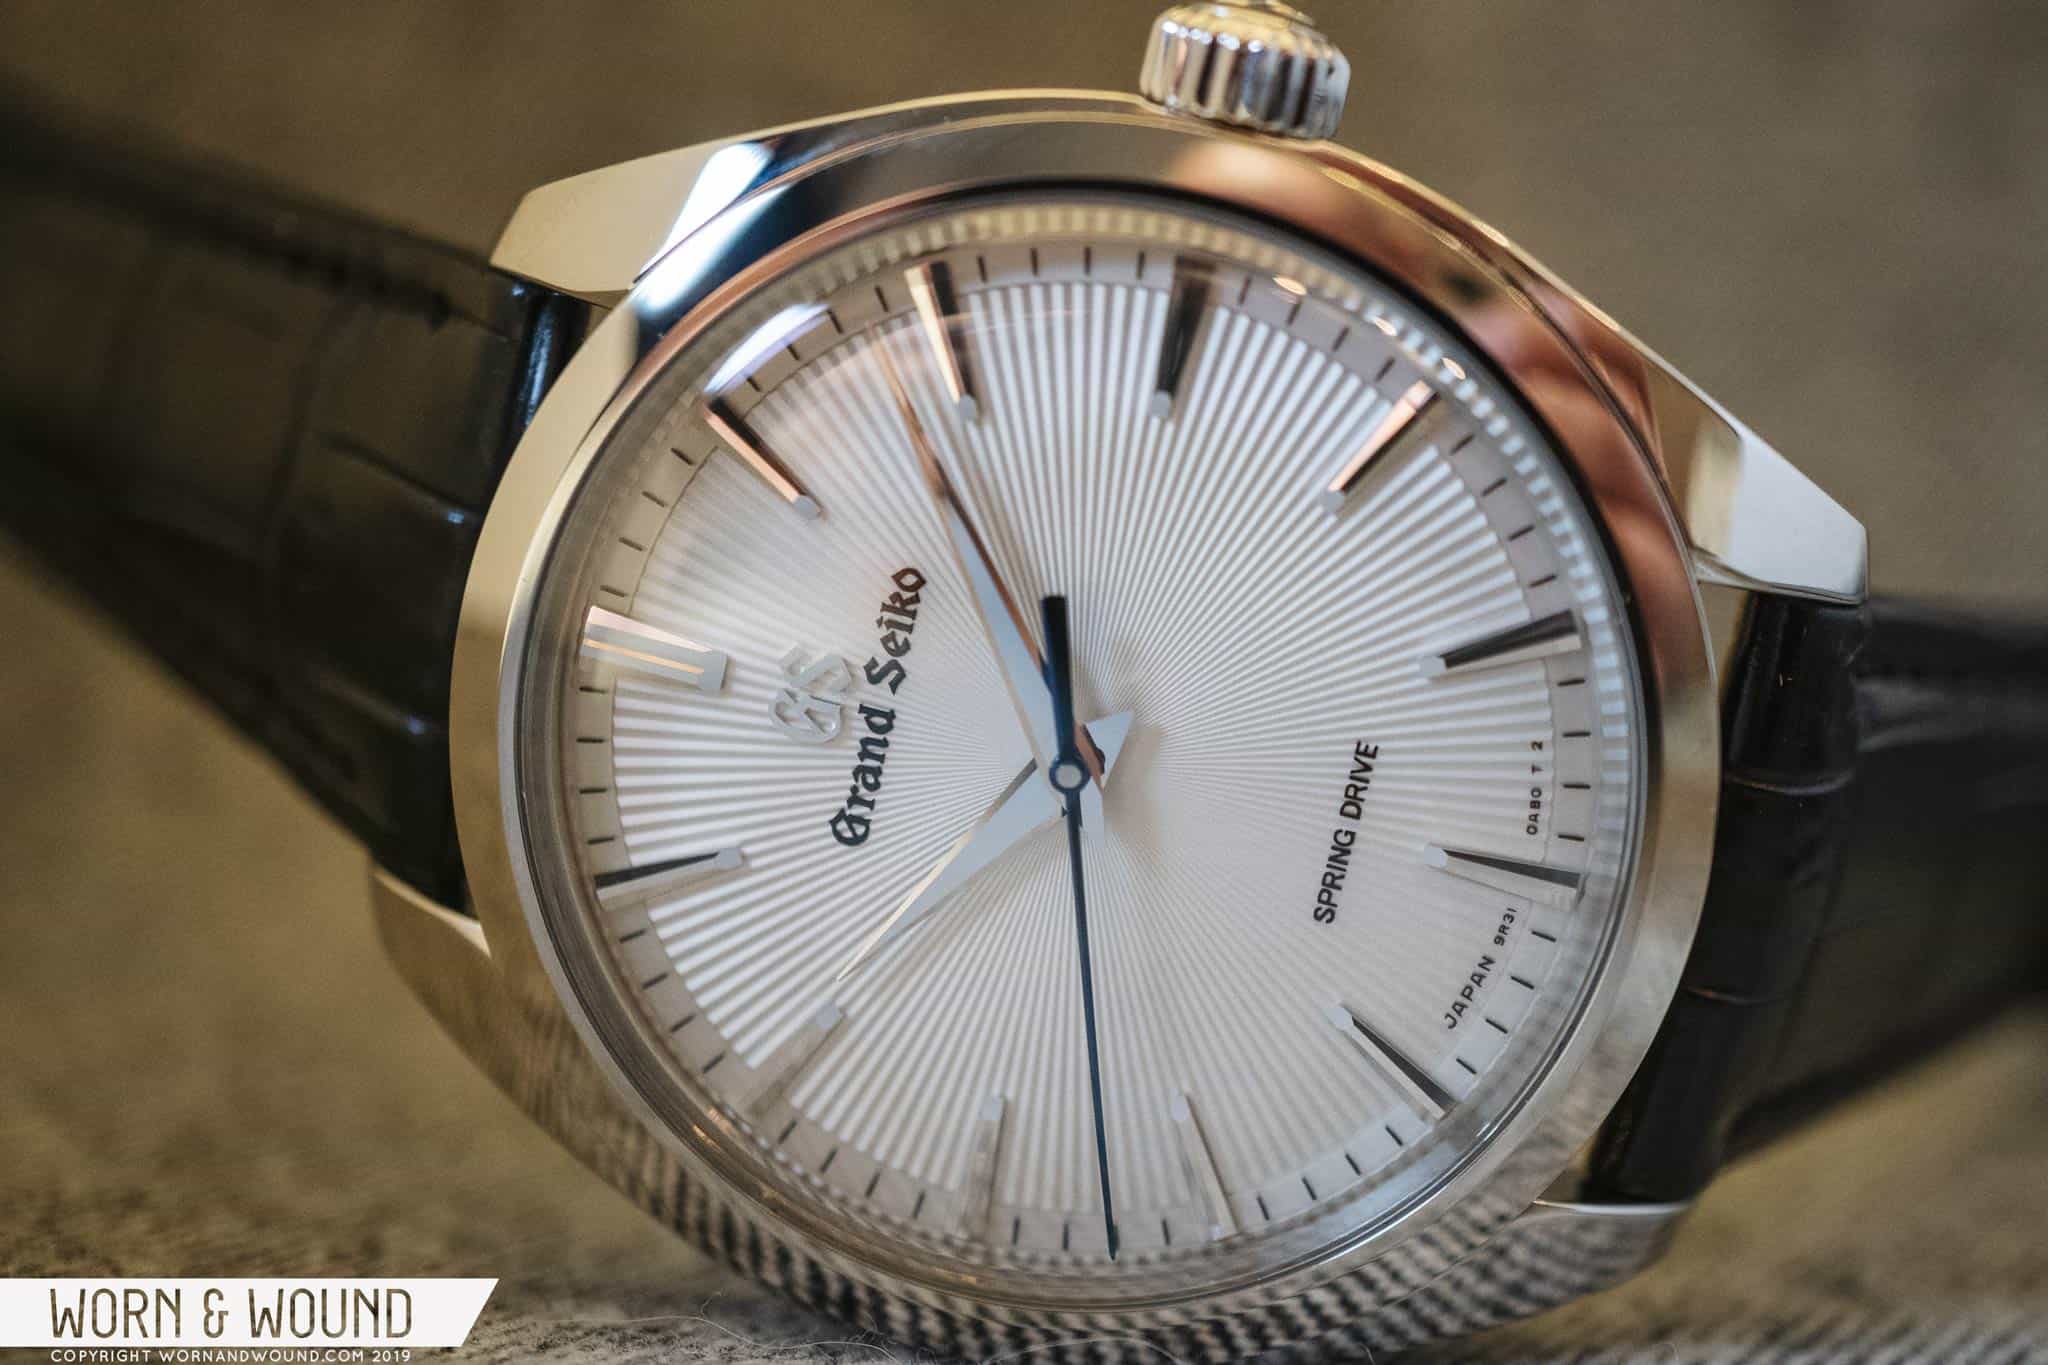 2019: First Look at the Grand Seiko Elegance SBGY003 - Worn Wound